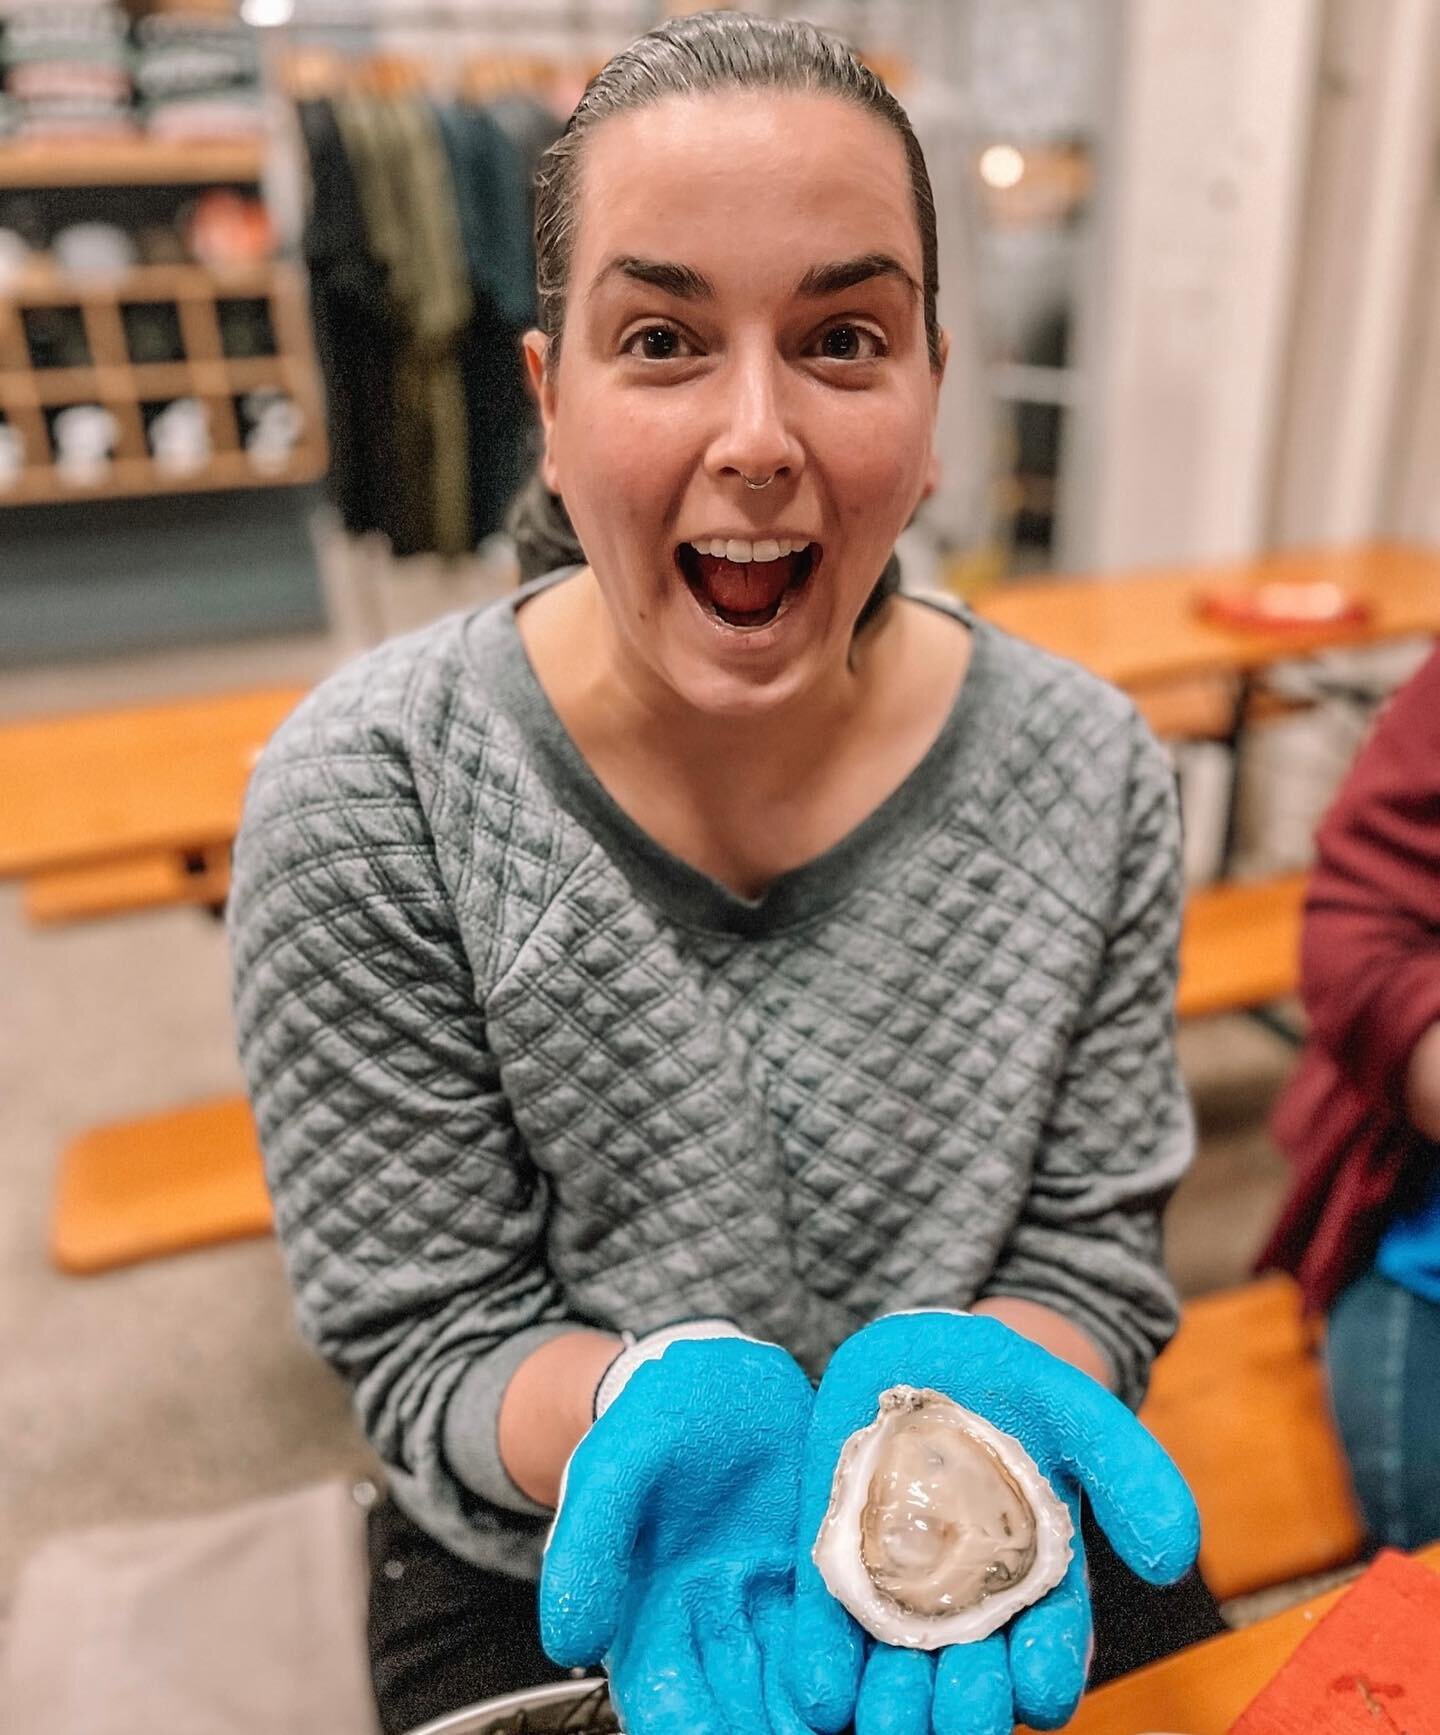 NEXT LEARN 2 SHUCK CLASS ⚔️🥃
MAY 24th 6-8pm @threeofstrongspirits

Tickets include 🎟️ 

-dozen oysters 🦪 
-accoutrements 🍋🌶️
-shucking tools 🧤⚔️
-drink ticket @threeofstrongspirits🔮
-instruction and open Q&amp;A from aquaculture professionals 